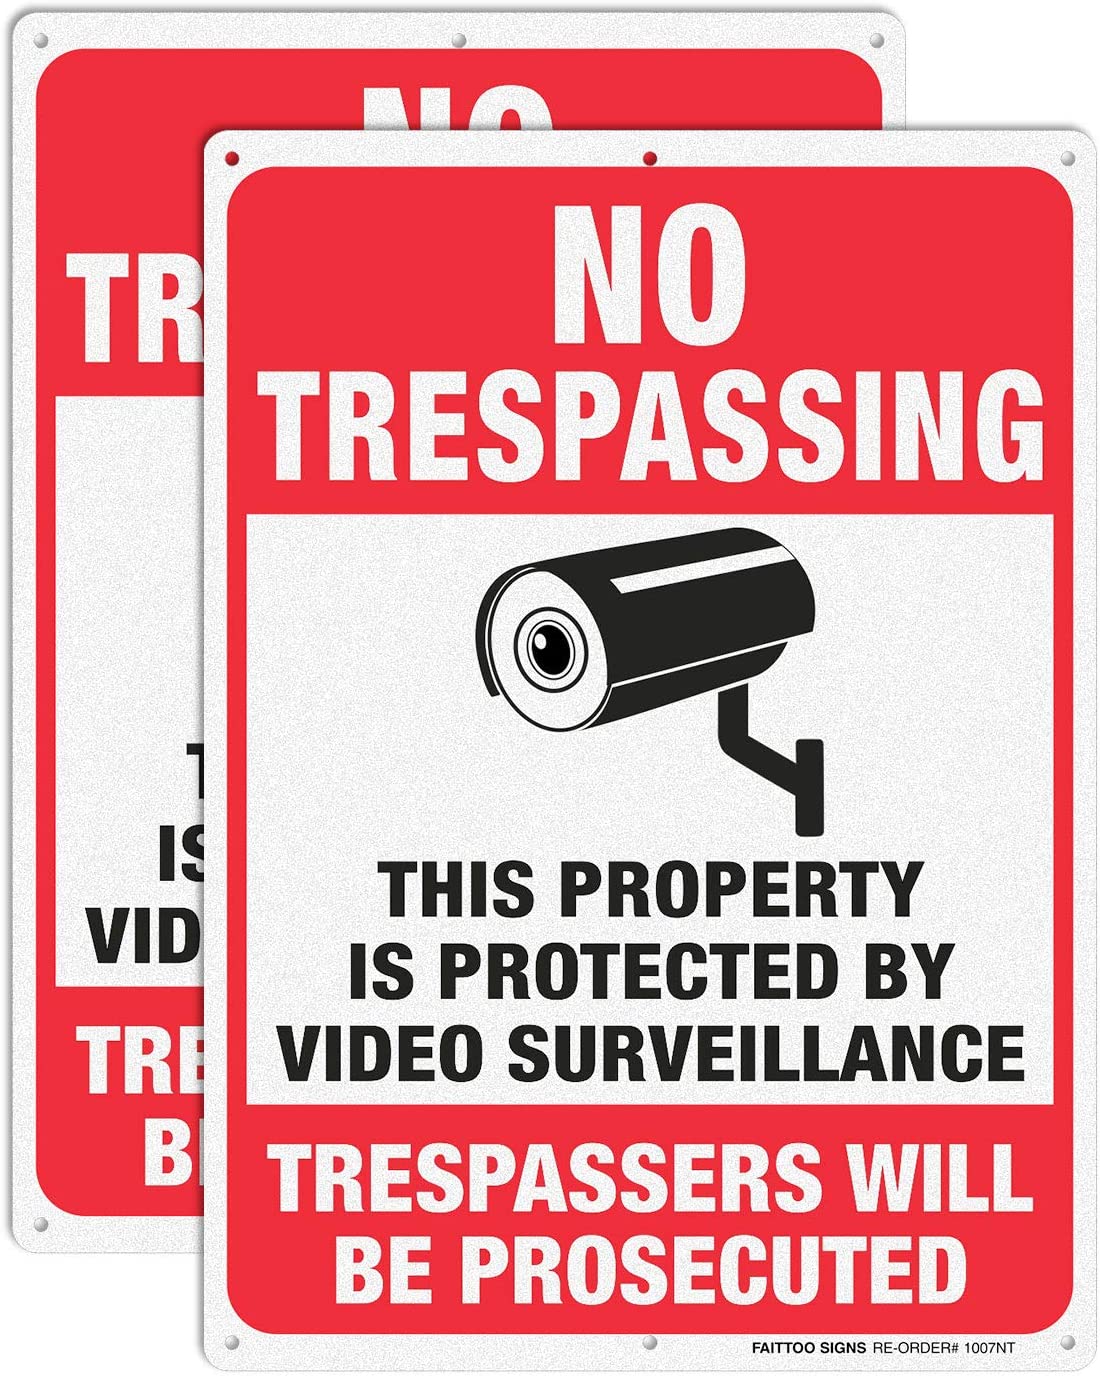 No Trespassing Sign,Trespassers Will Be Prosecuted Sign,Video Surveillance Sign,Warning Sign,10 x 7 Inches 0.40 Aluminum Reflective,Indoor Or Outdoor Use for Home/Business CCTV Security Camera